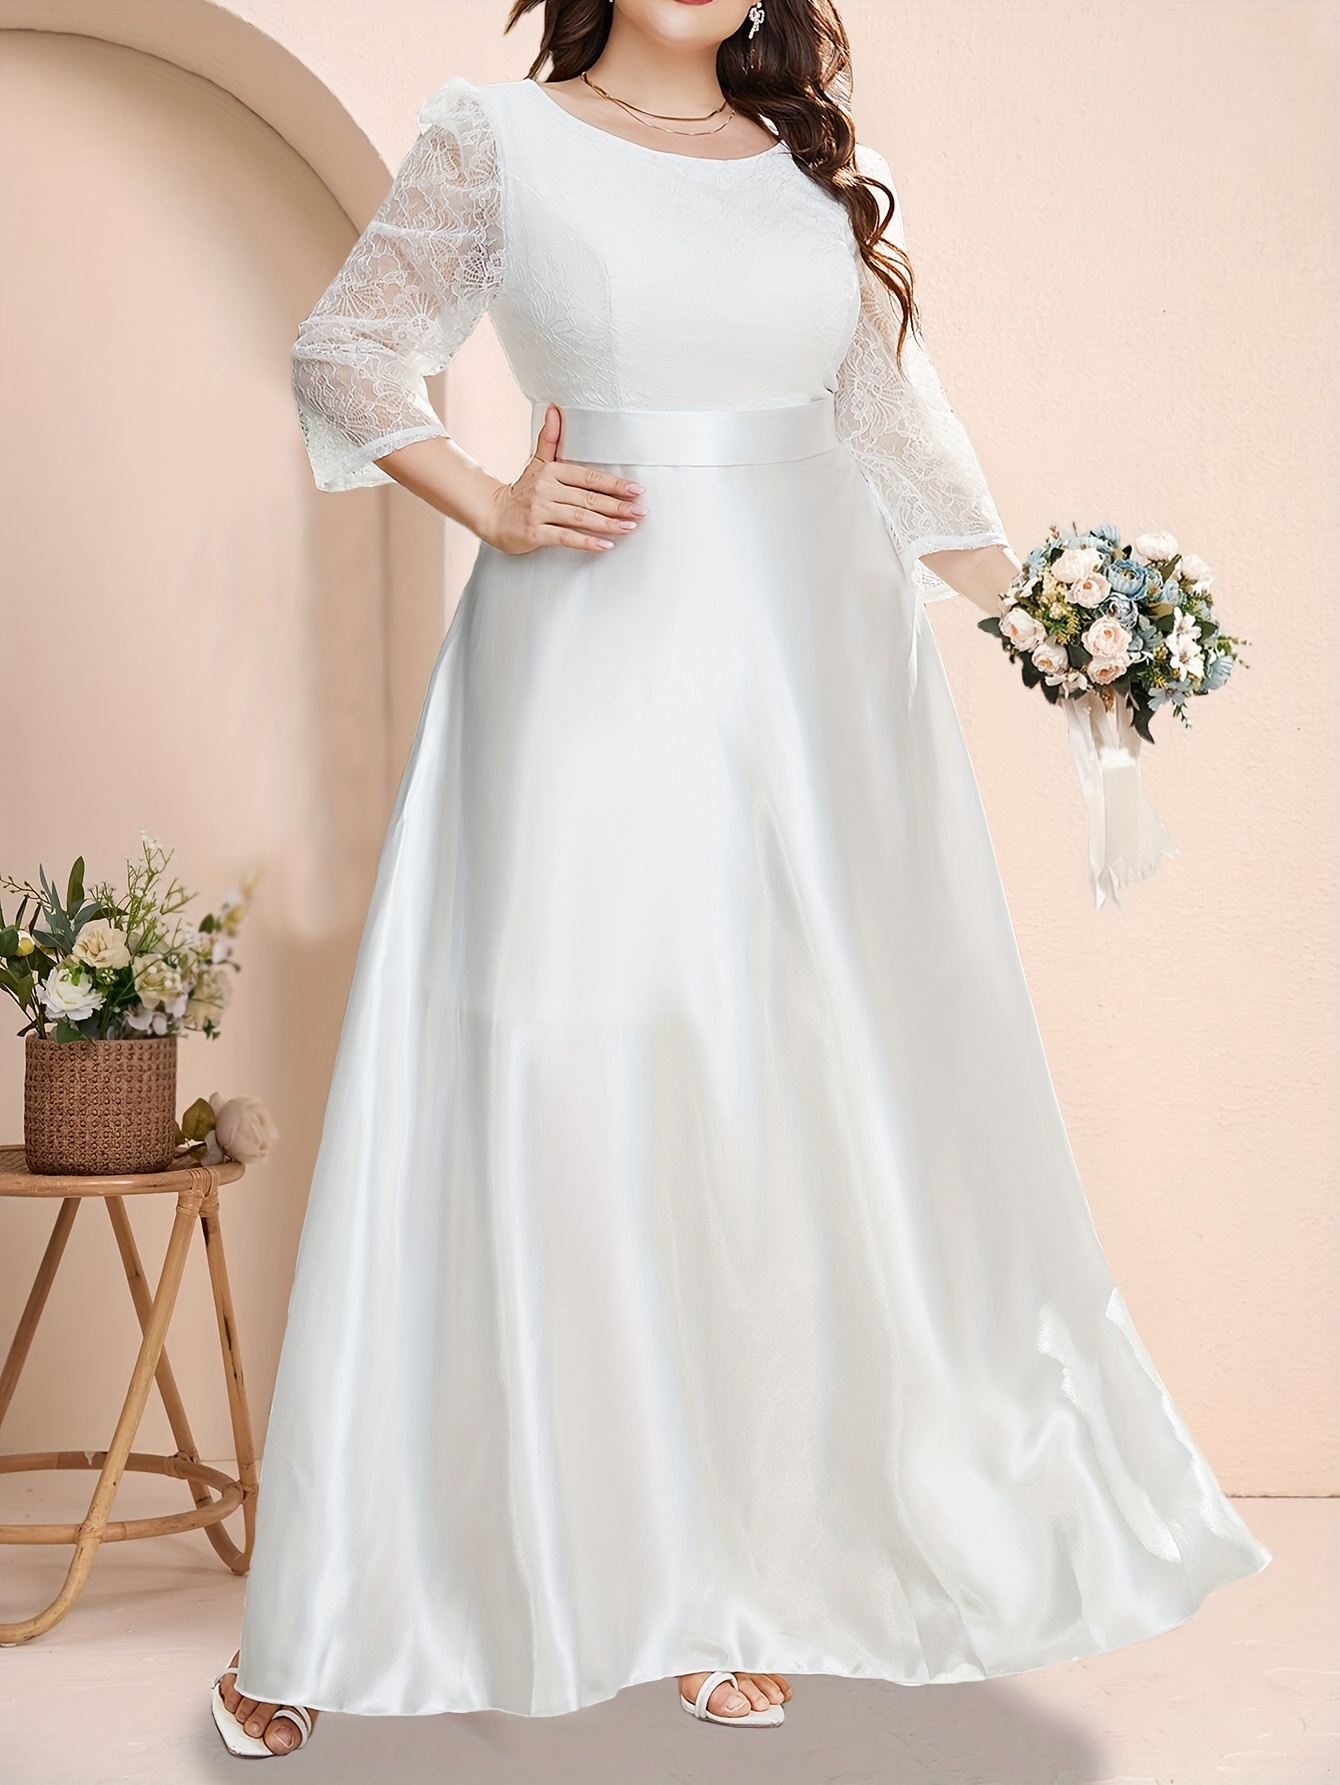 Plus Size Elegant Wedding Dress, Women's Plus Floral Embroidery Mermaid  Tail Lace Long Sleeve V Neck Double Layer Backless Wedding Dress